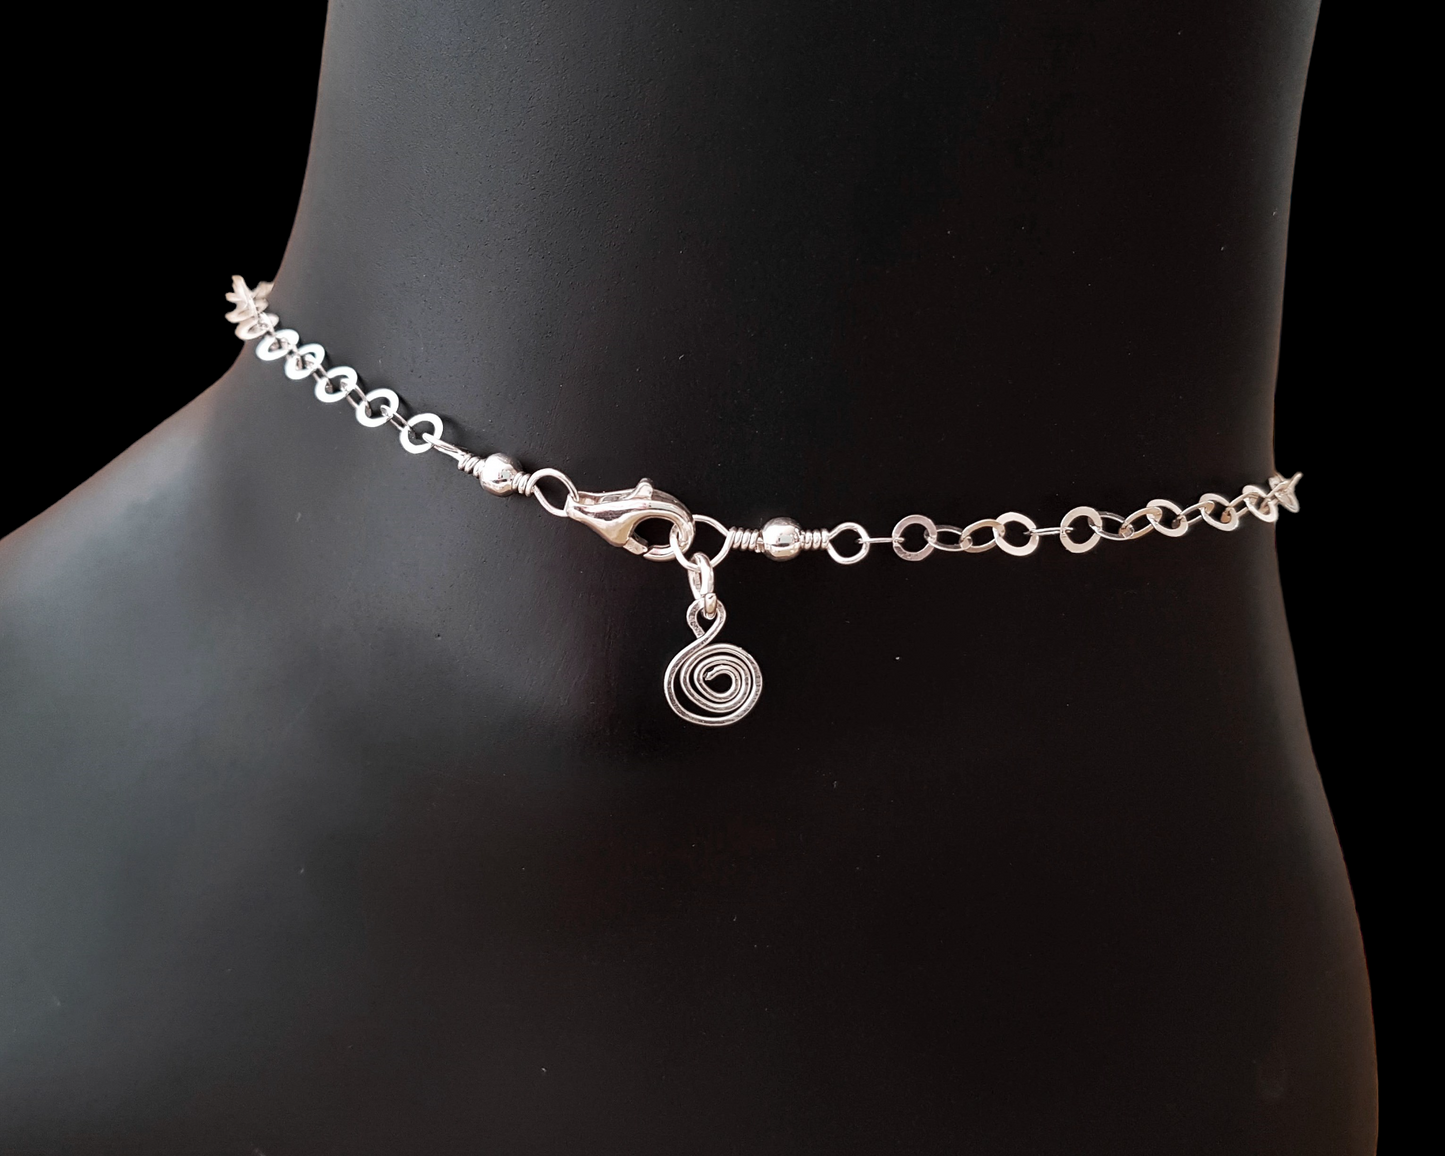 Ankle Bracelet end with sparkly flat rolo style chain, lobster claw clasp, wire wrapped loops and Celtic Eternity Coil pendant dangling on the end.